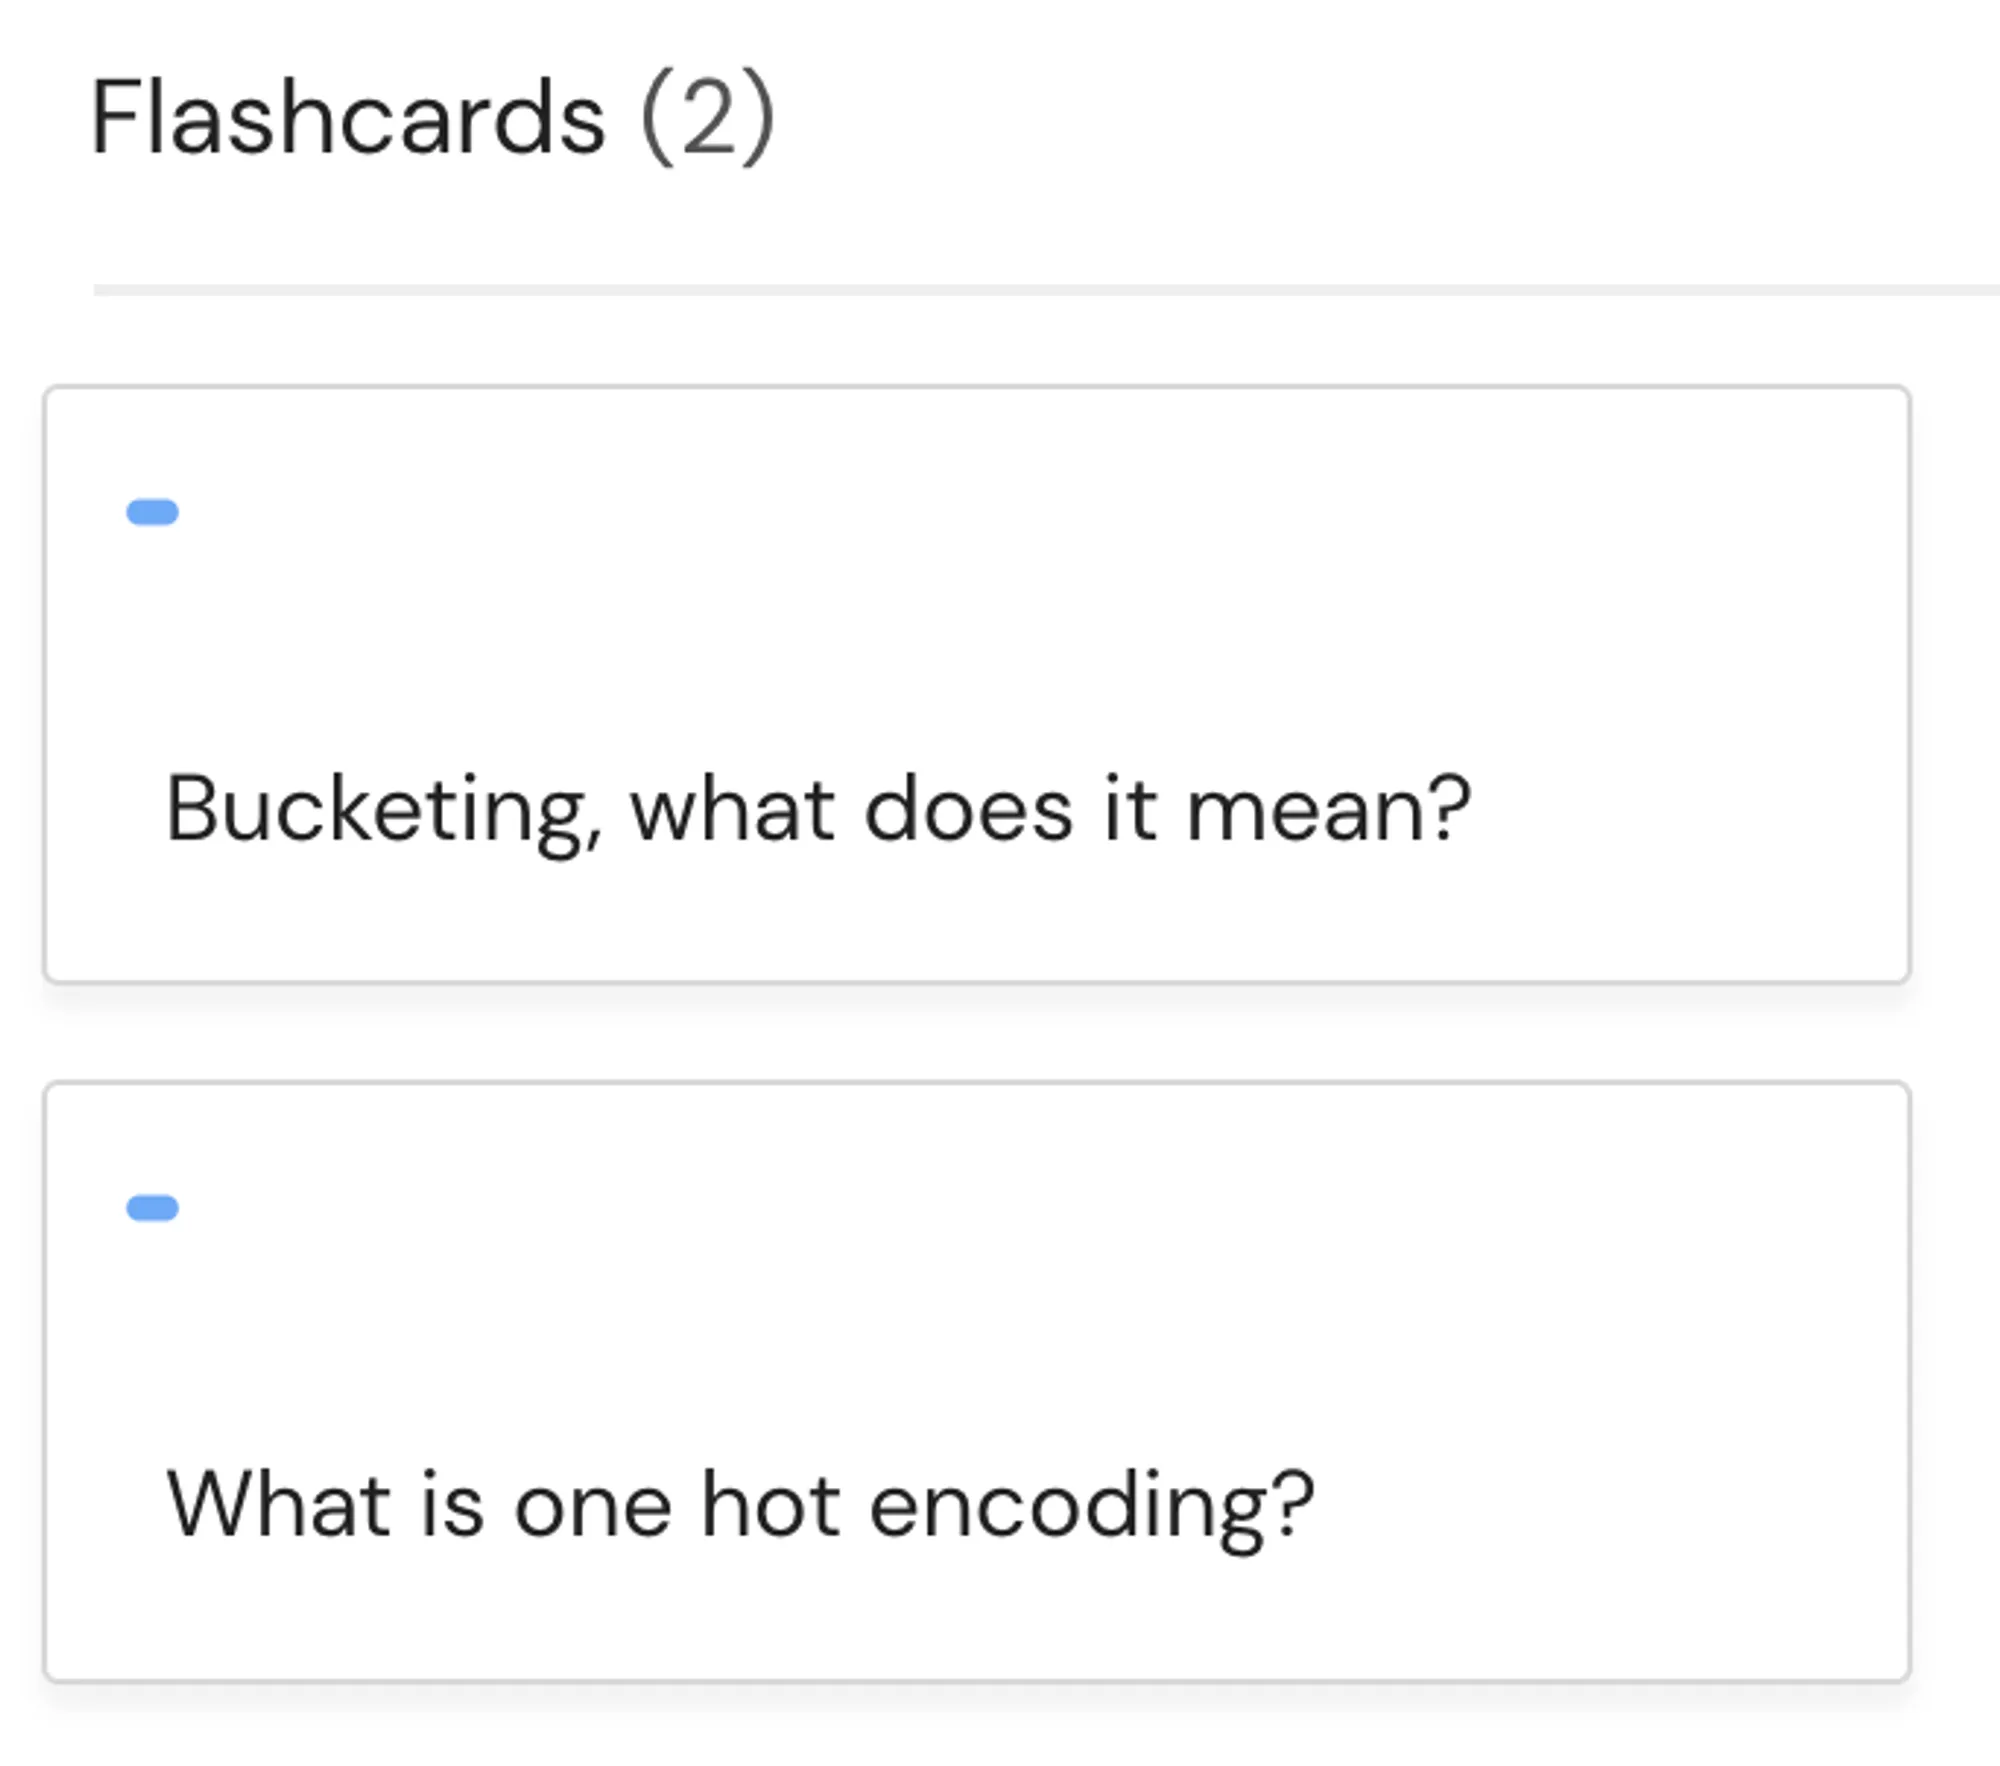 Bad flashcards: they both ask for definitions, but it’s hard to tell since they are inconsistent